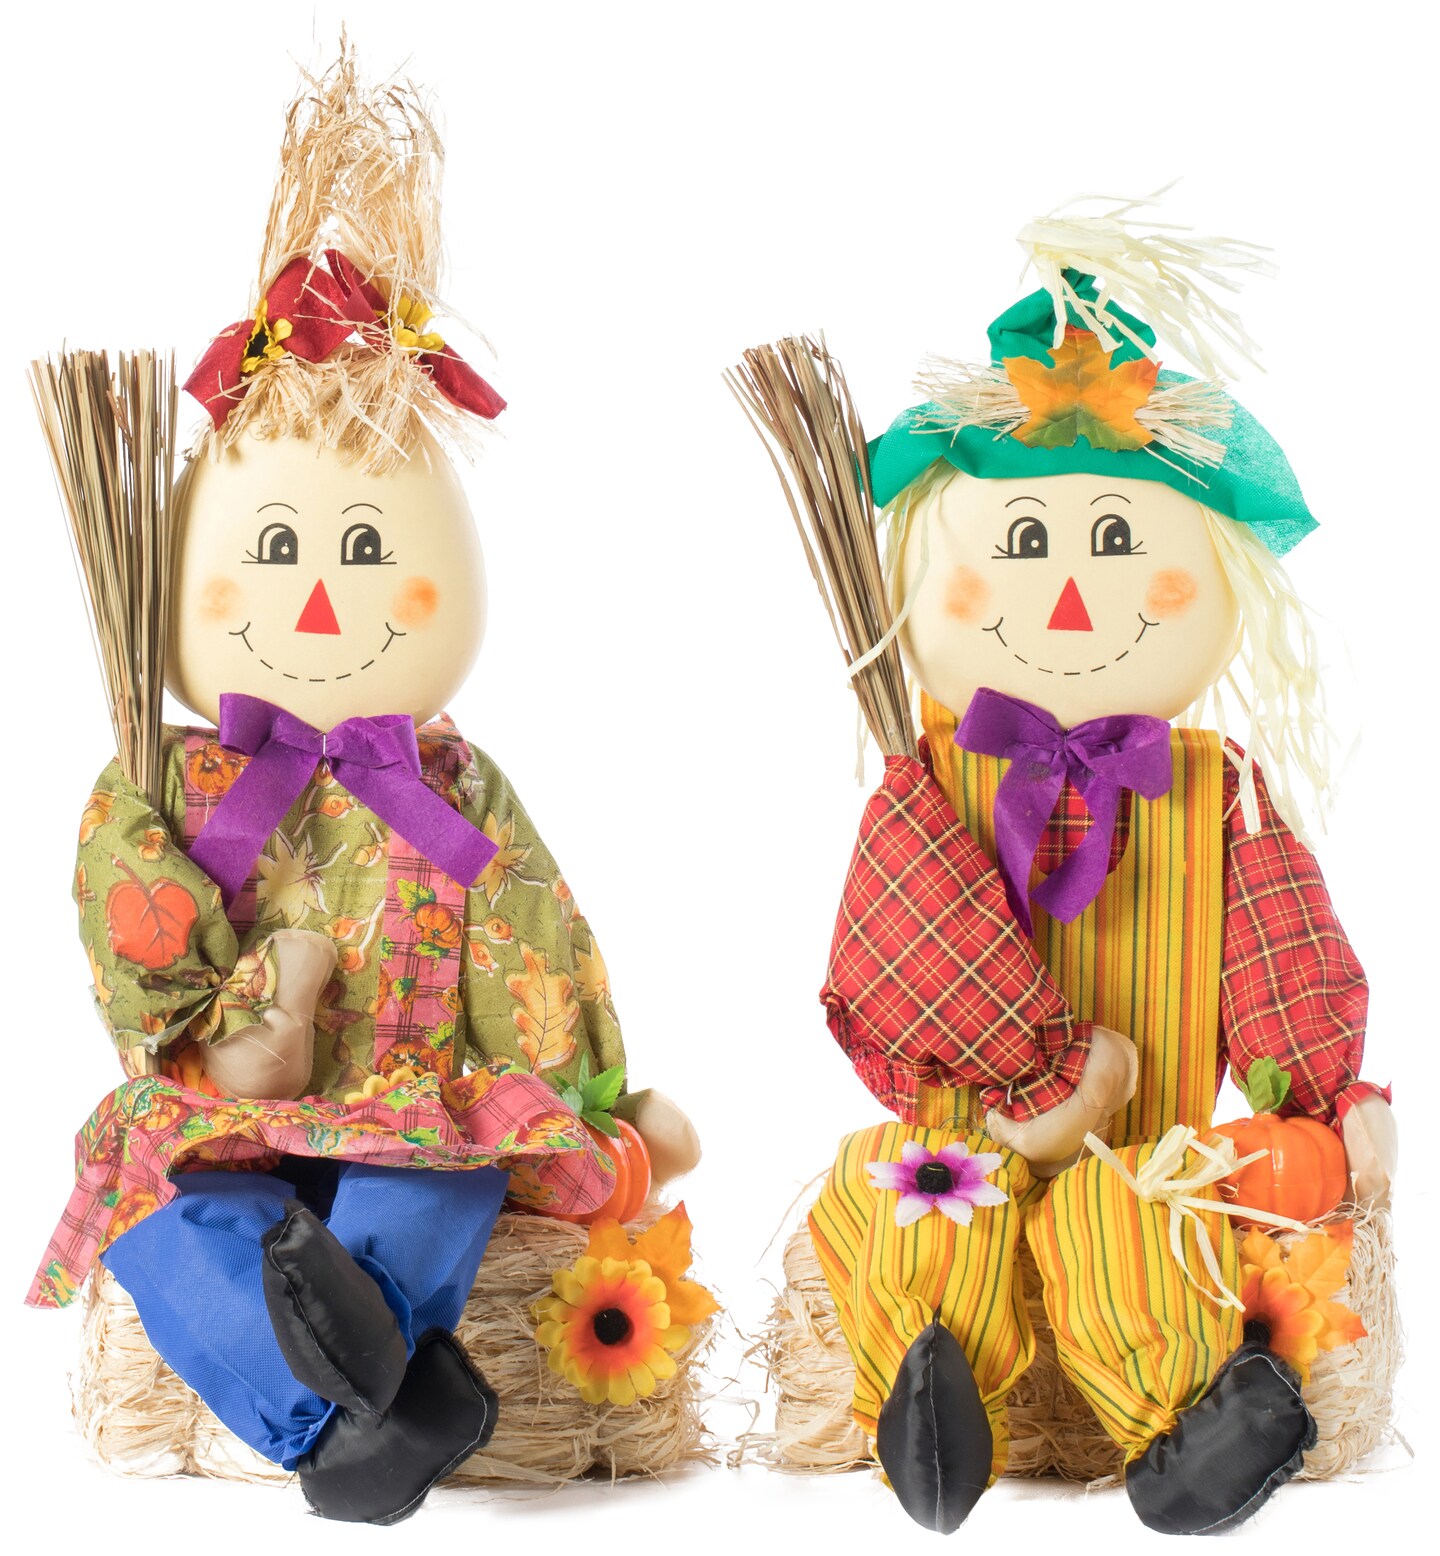 Gardenised 26 Inch Outdoor Set Featuring Boy and Girl Garden Decoration Scarecrow, Seated on Hay Bales Perfect for Adding a Festive Touch to Your Halloween Decorations, Fall or All Time Season